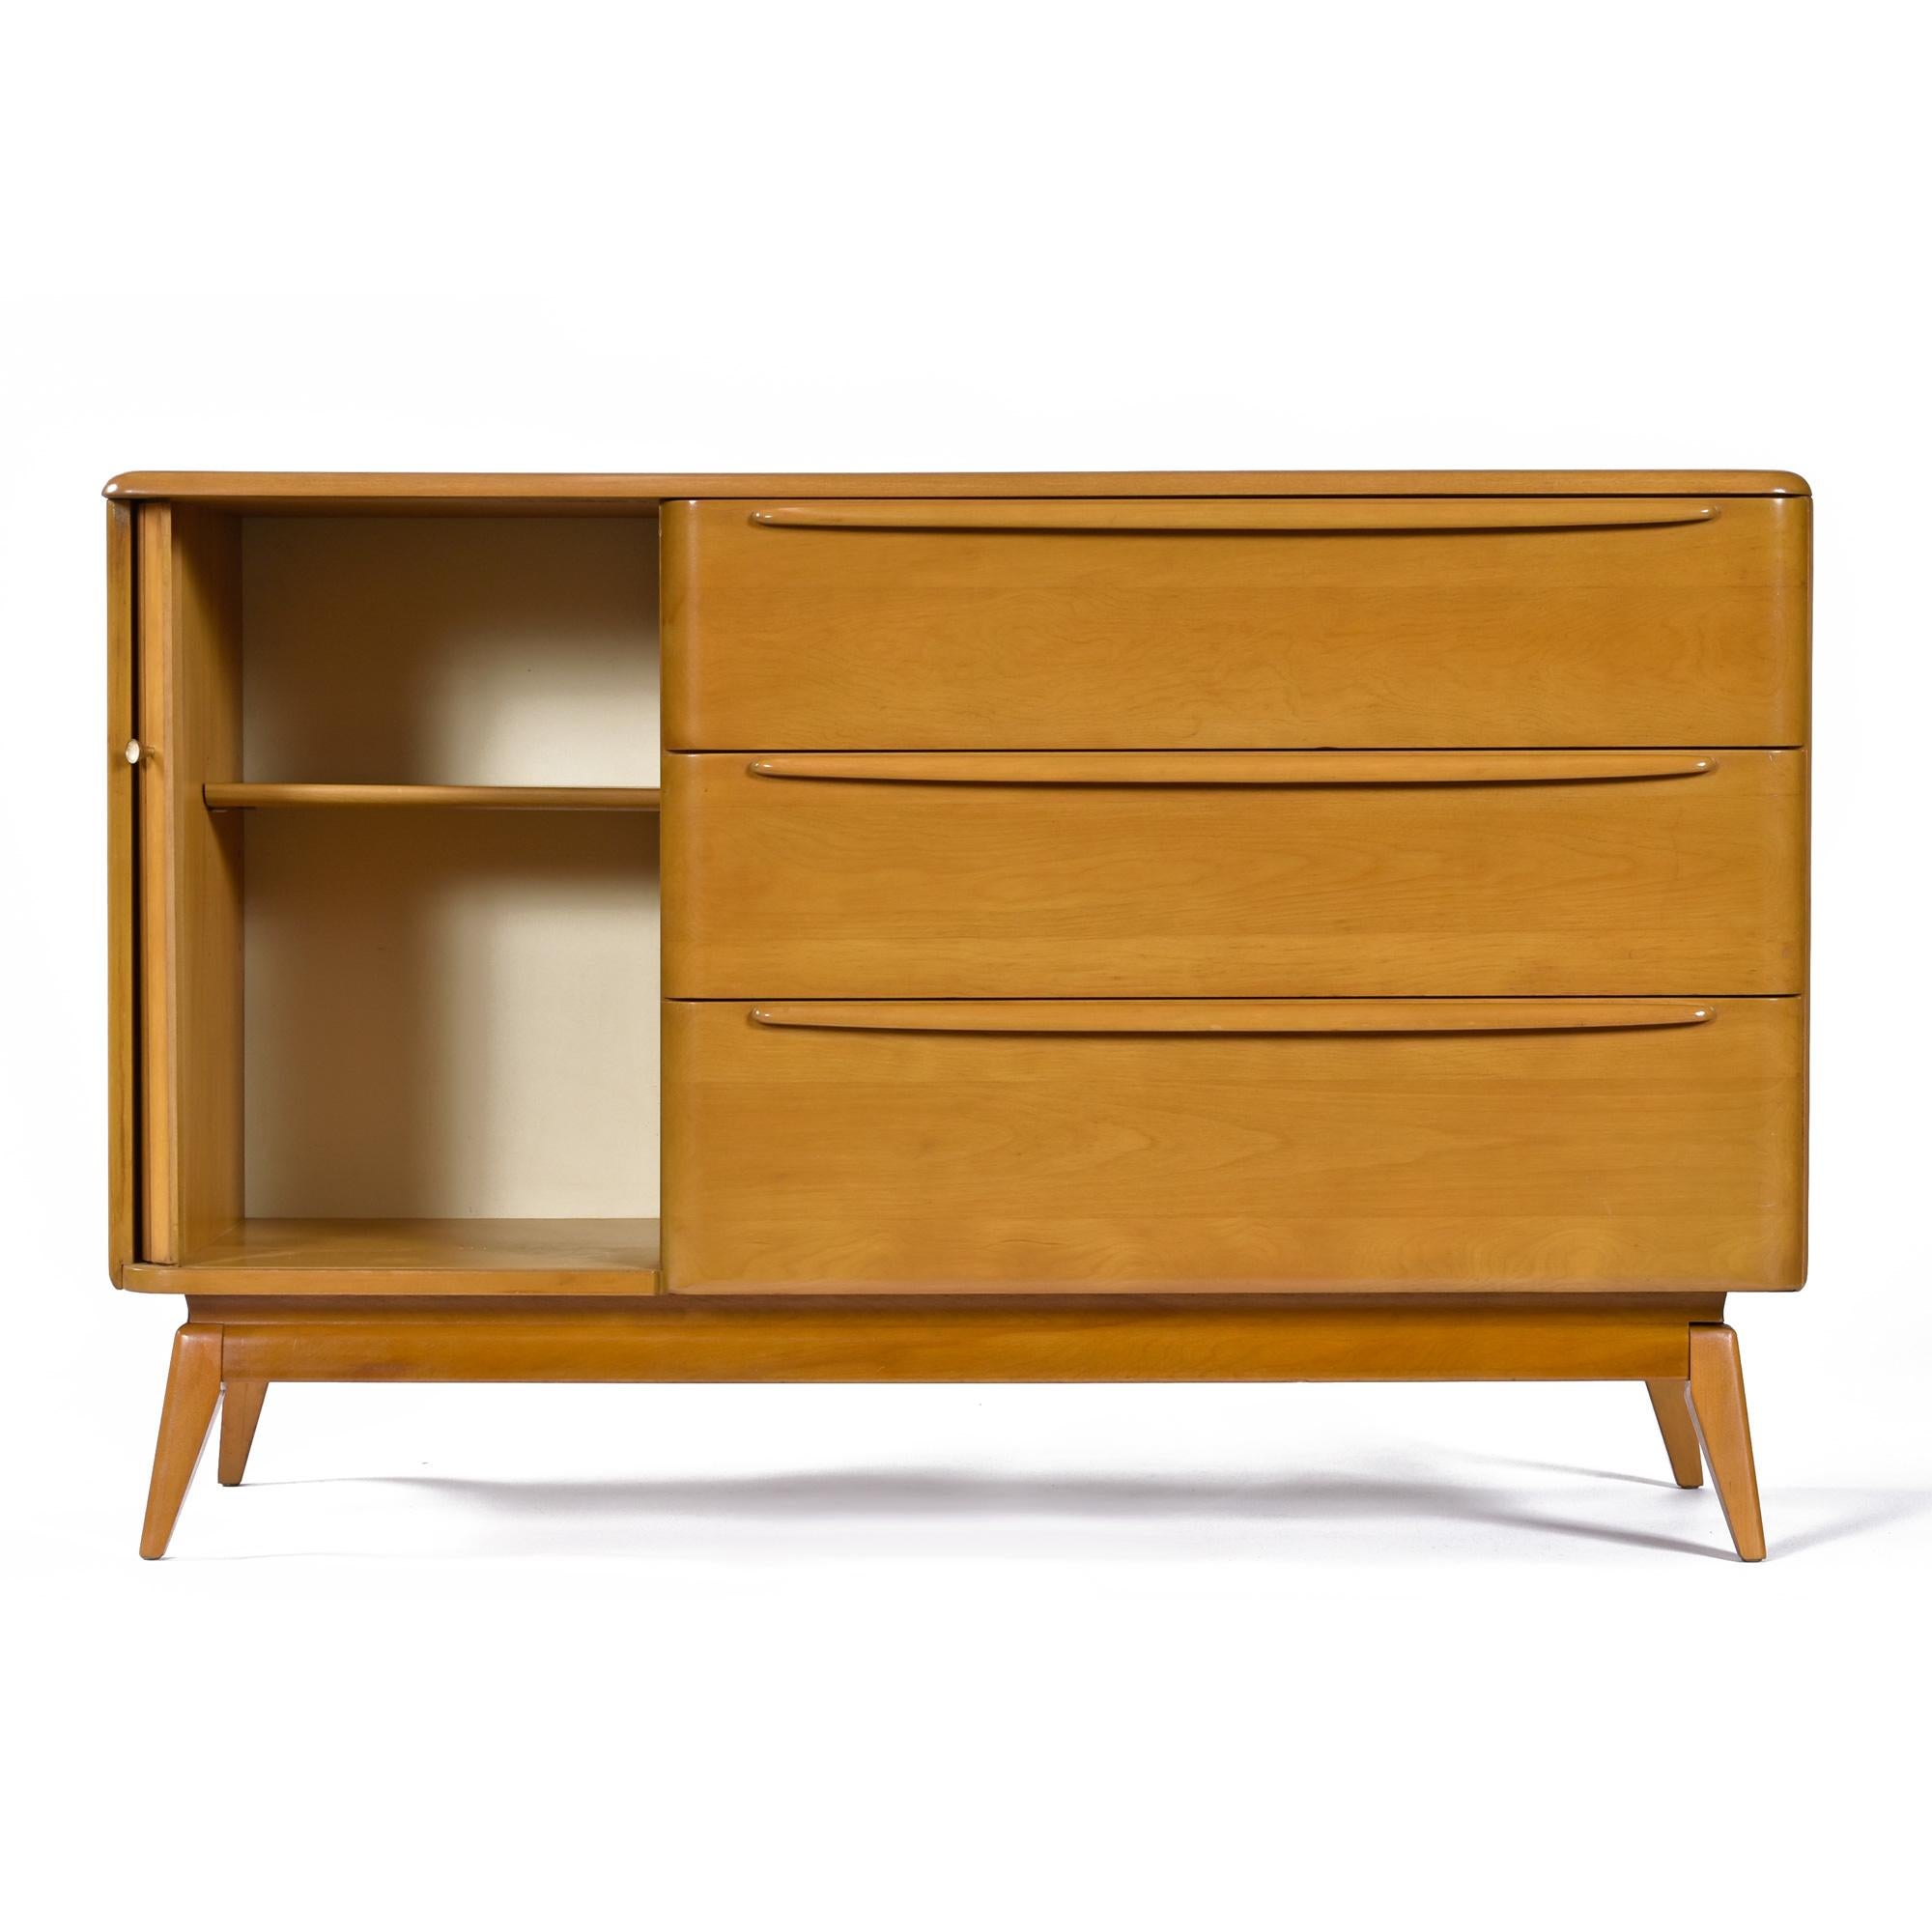 Mid-Century Modern Vintage Restored Solid Maple Heywood Wakefield M-1542 Wheat Tambour Credenza For Sale